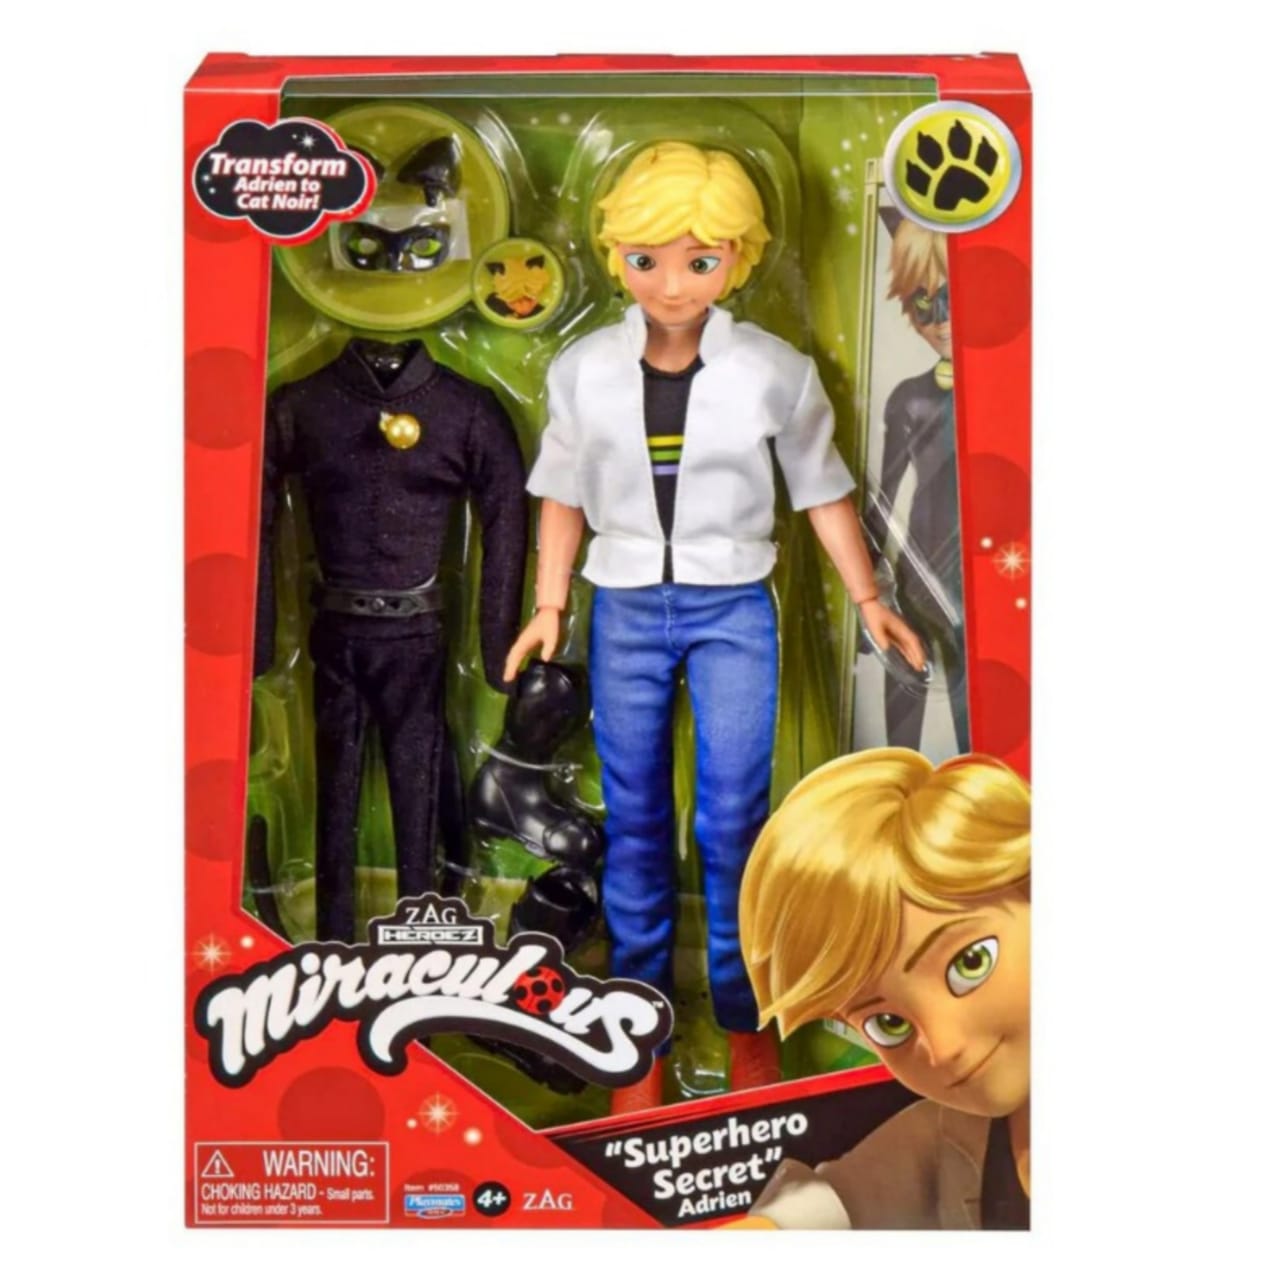 MIRACULOUS, 🐞 NEW TOY LINE - FASHION DOLLS & PLAYSET 😍